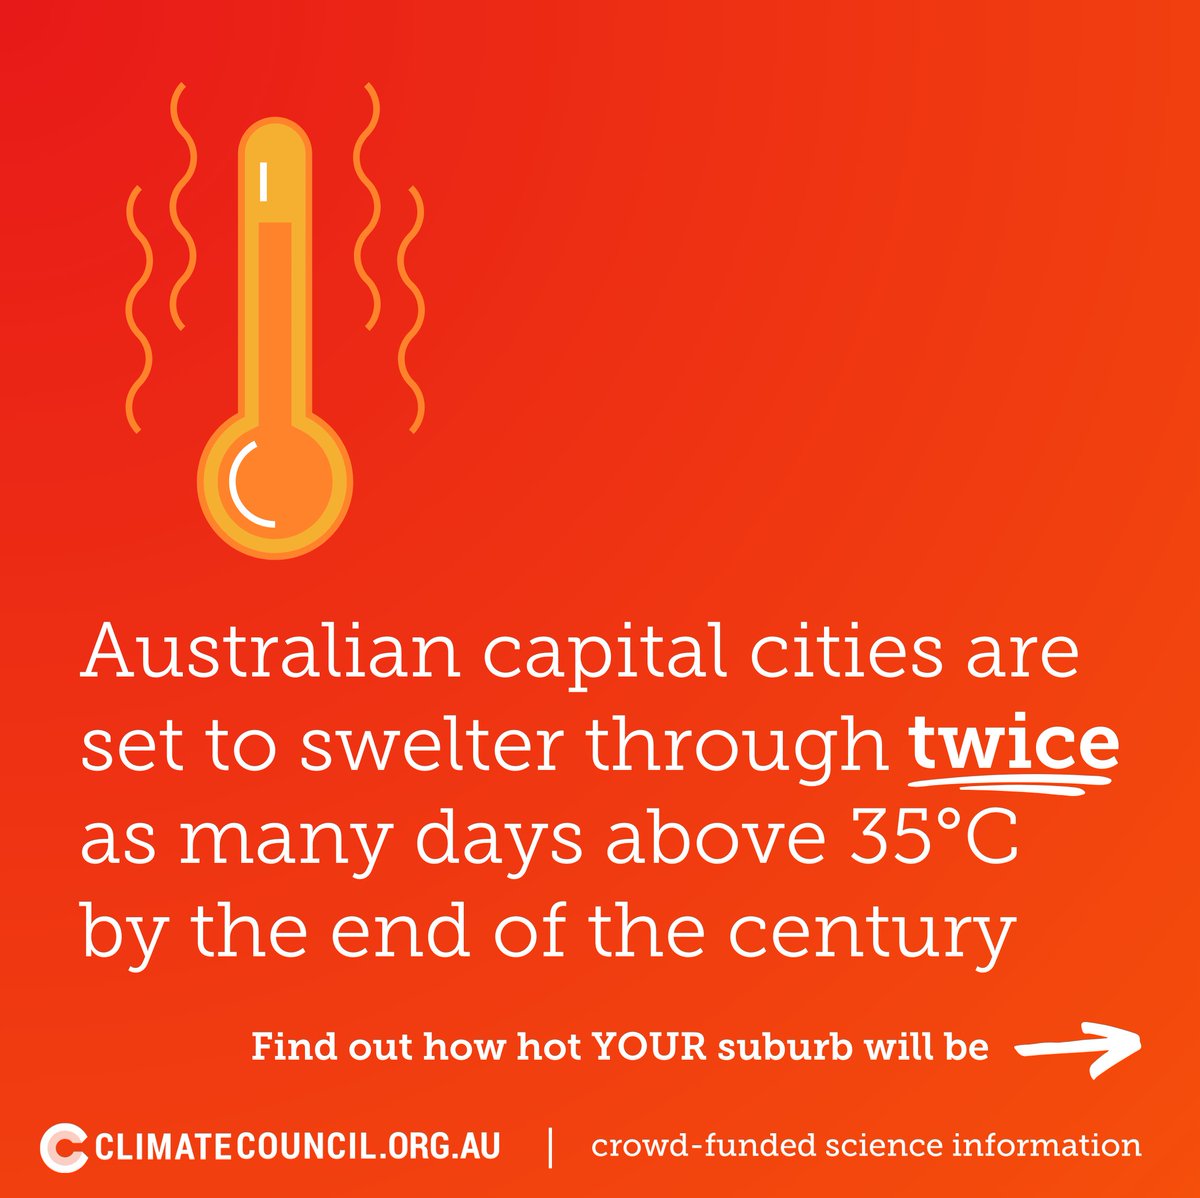 Extreme heat is the most lethal consequence of climate change. A new Climate Council map shows that unless stronger action is taken to cut climate pollution, Australian capital cities will swelter through twice as many hot days by 2090. #CCHeatMap
climatecouncil.org.au/resources/heat…